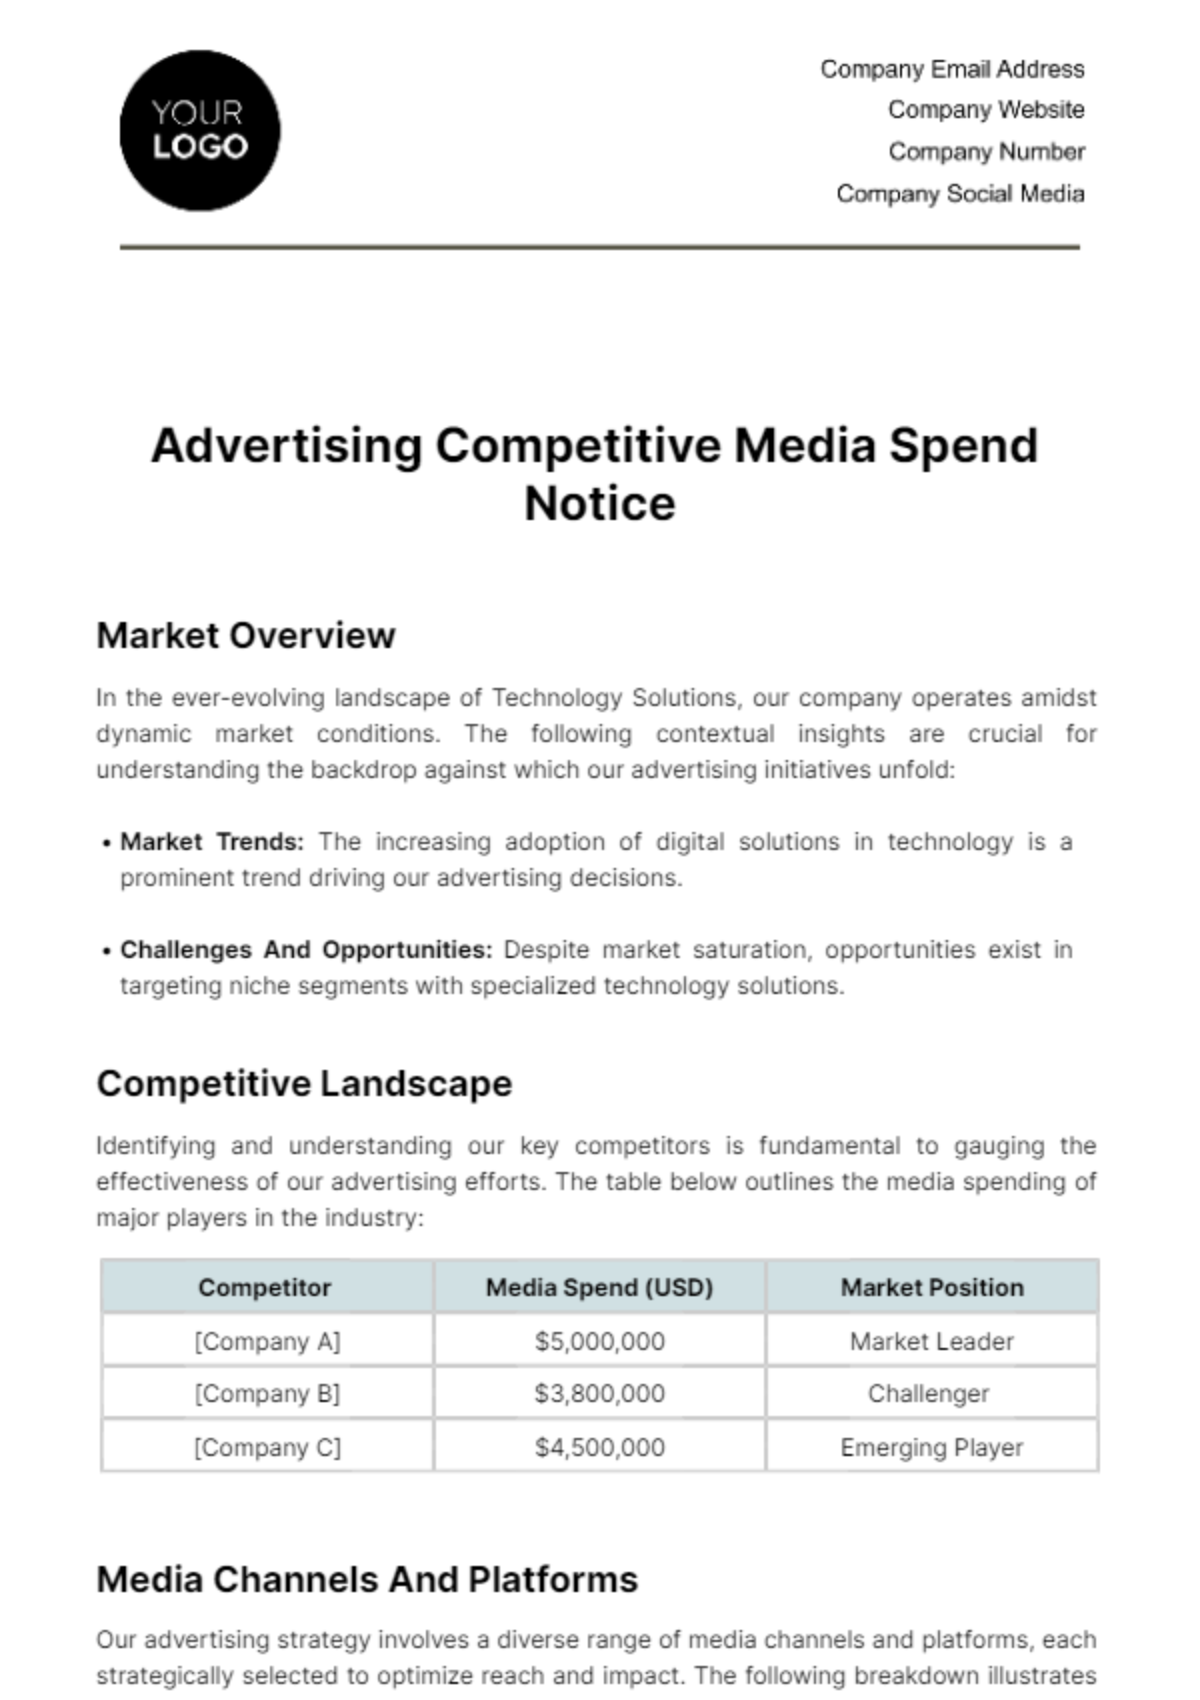 Free Advertising Competitive Media Spend Notice Template